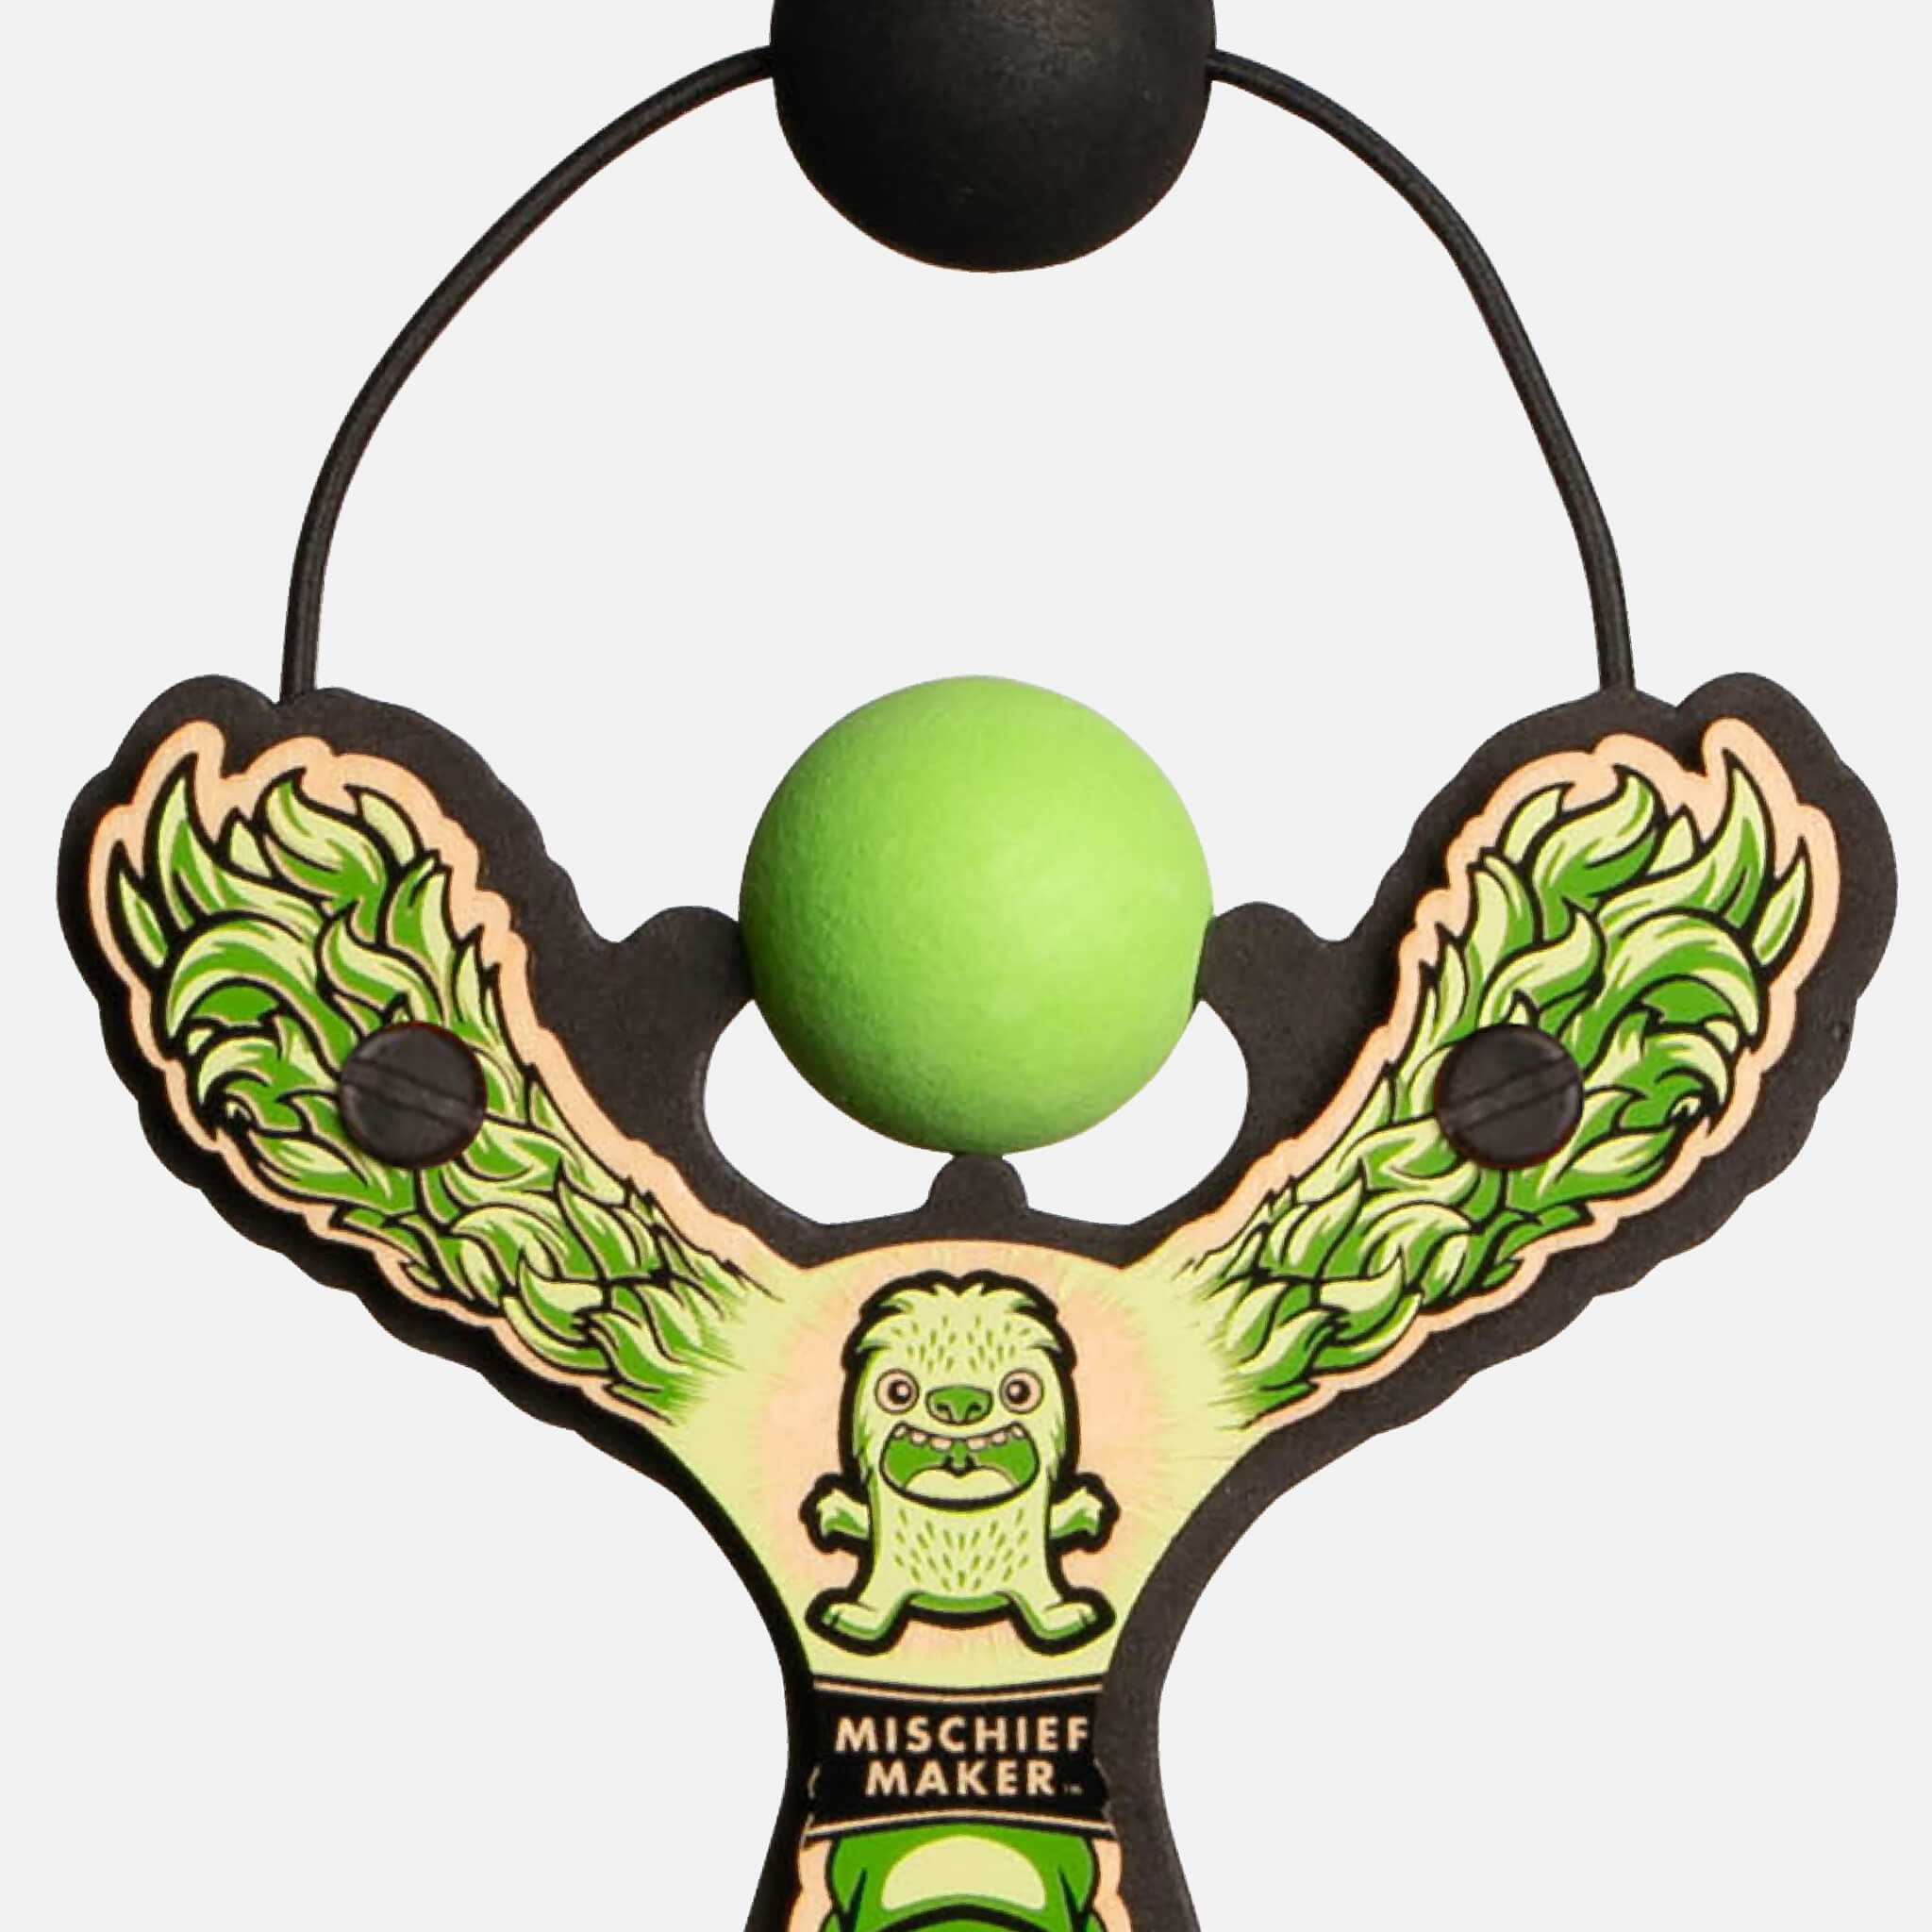 Green Monster toy slingshot hand held with ball foam ball. Mischief Maker by Mighty Fun!